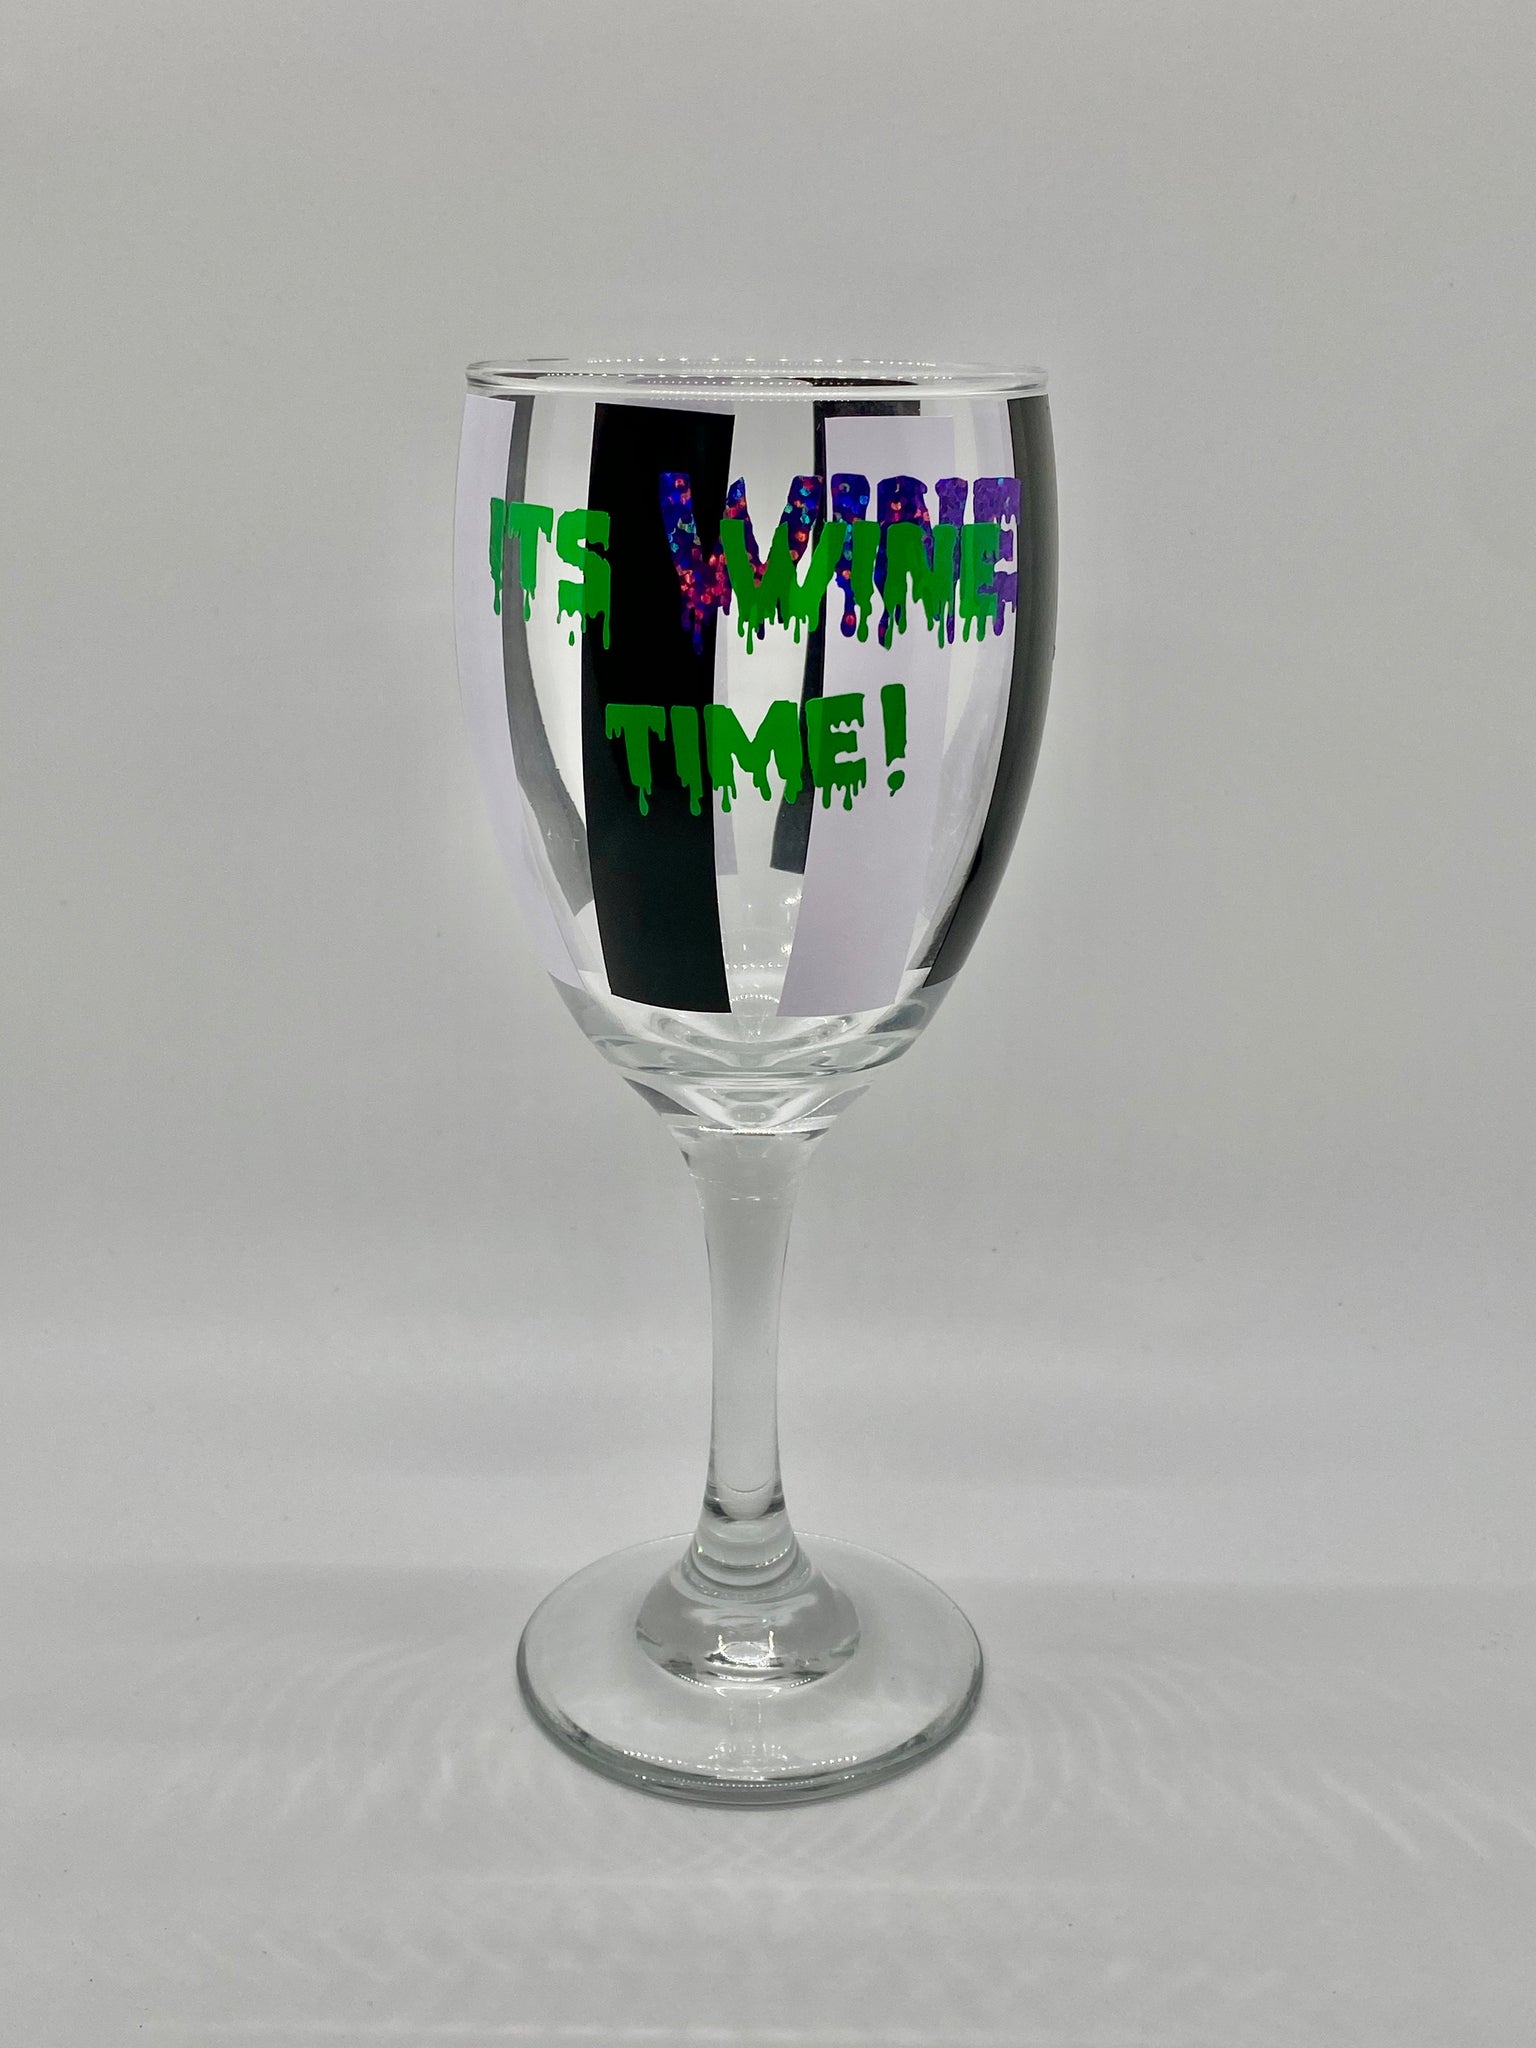 Pack of 3 Wine Glasses Star Wars Inspired – MWimi's Collection